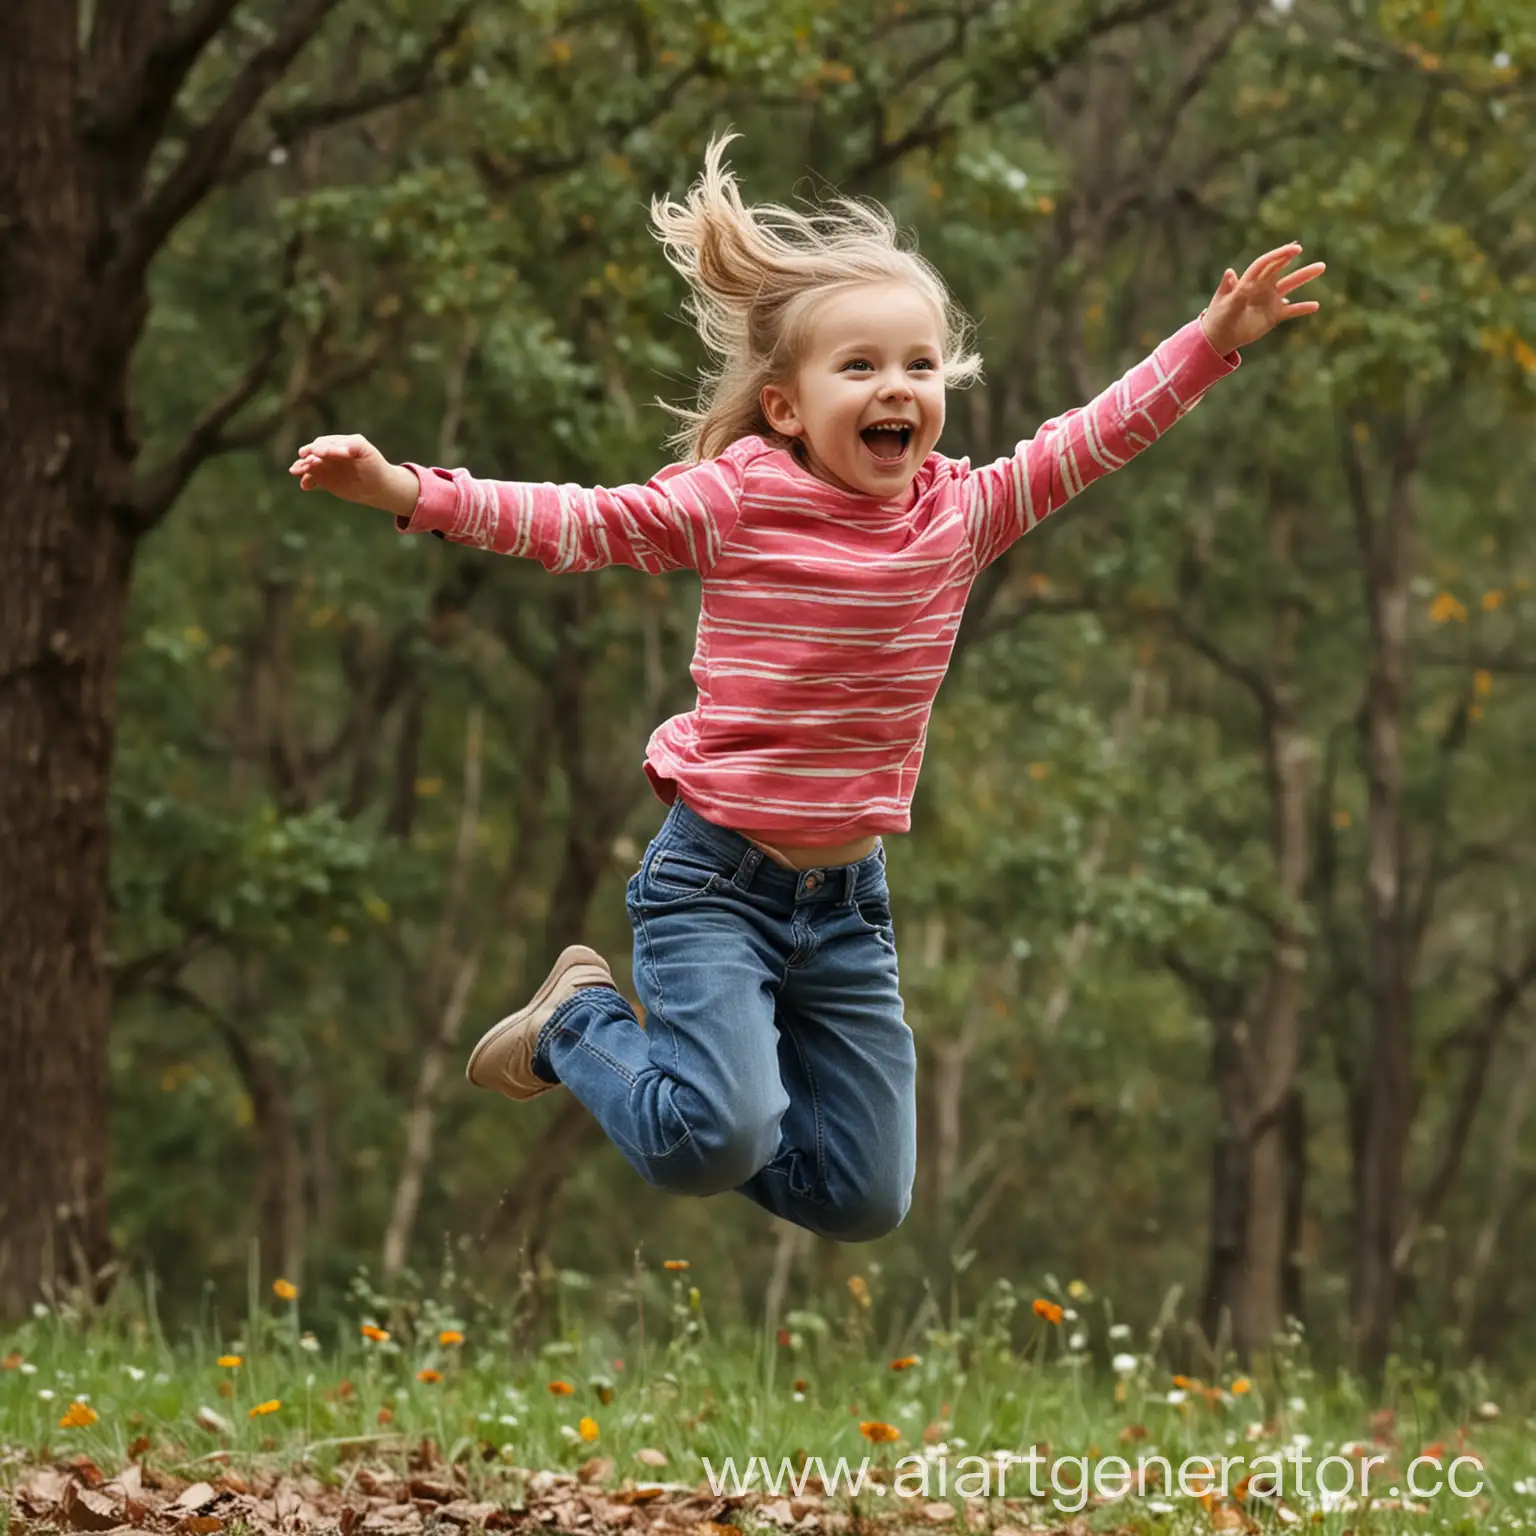 Joyful-Child-Leaping-with-Delight